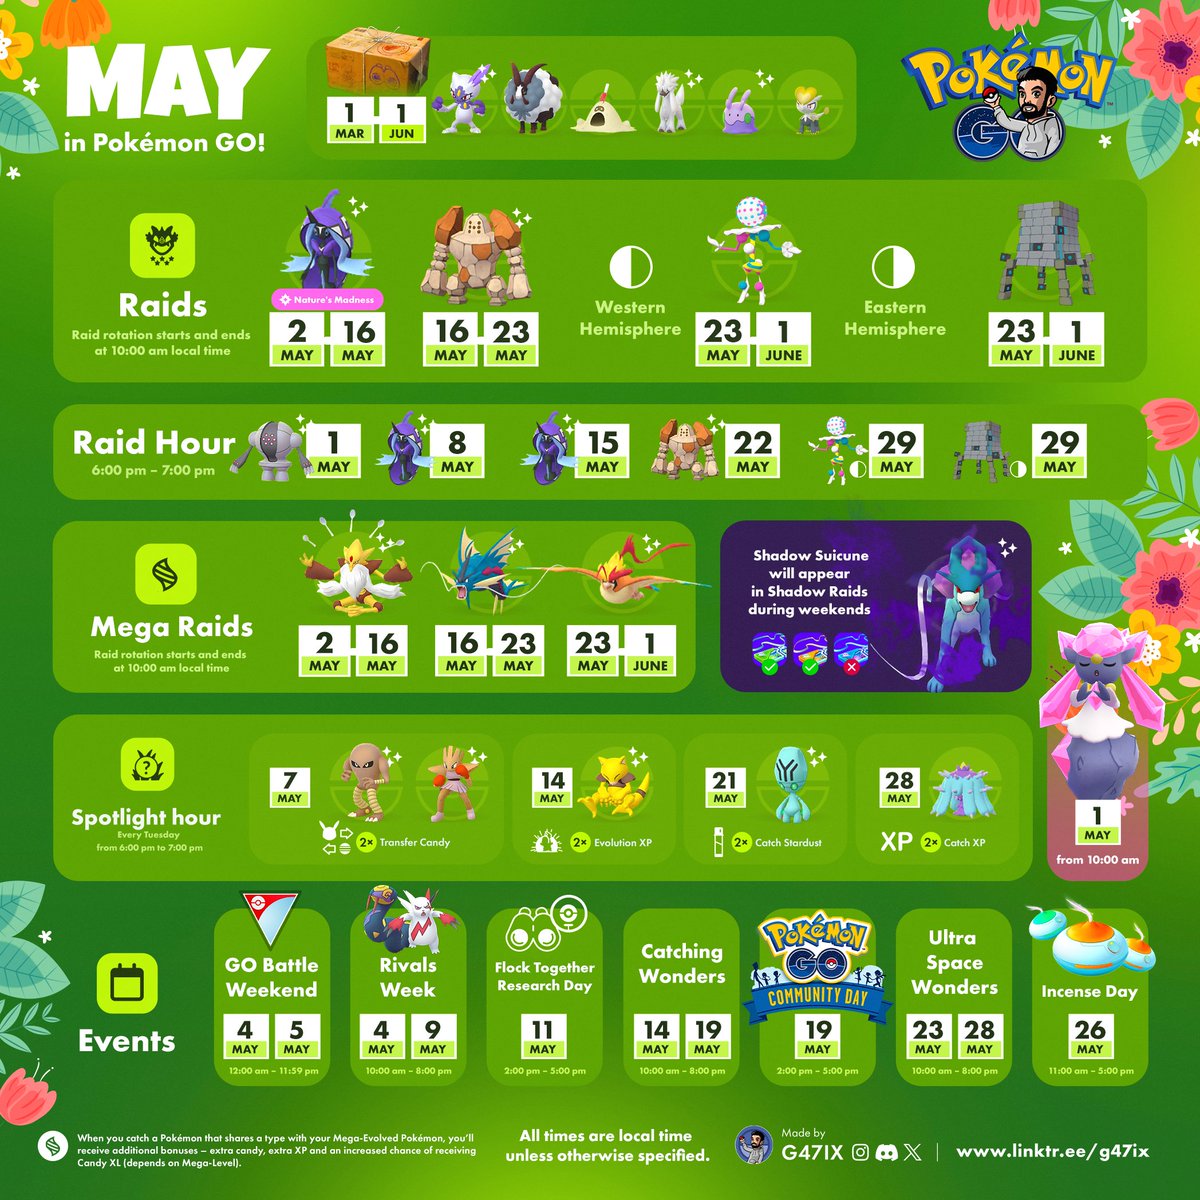 May Content Update🌷 #pokemongo
Tapu Fini with Natures Madness, new regional Ultra Beasts, Diancie for everyone, and more!

Save for later 👇